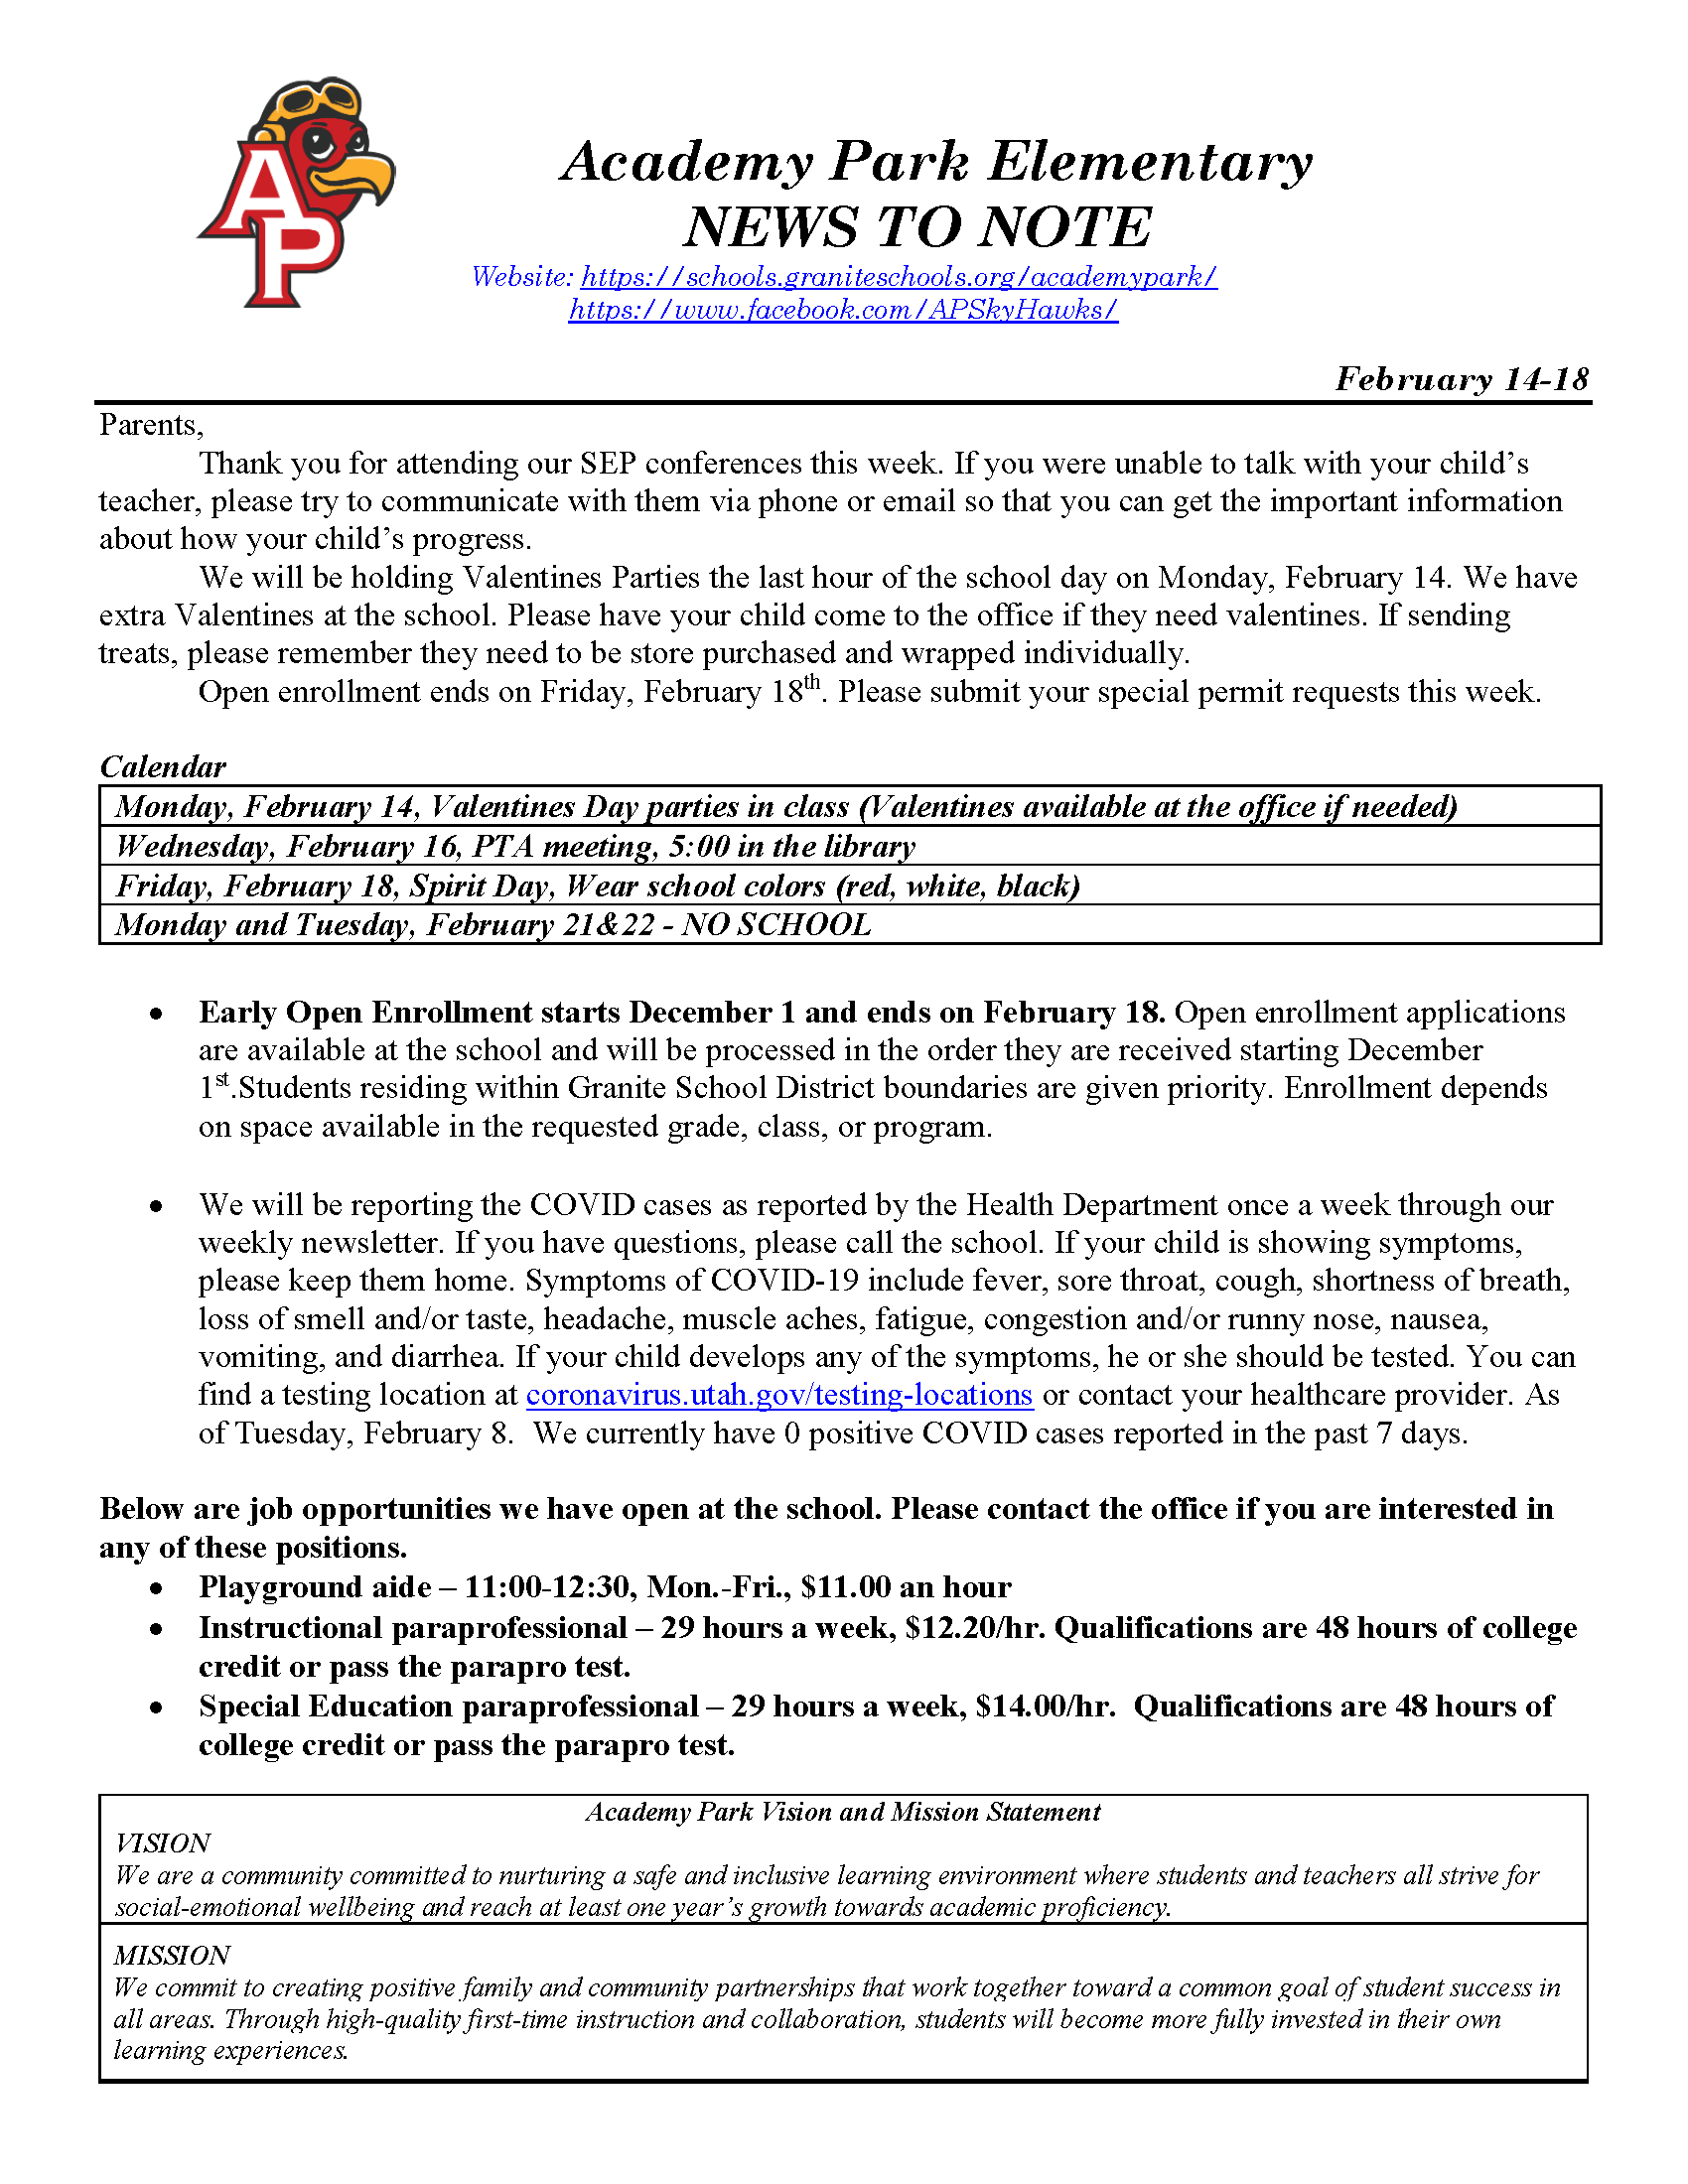 Weekly Newsletter February 14-18